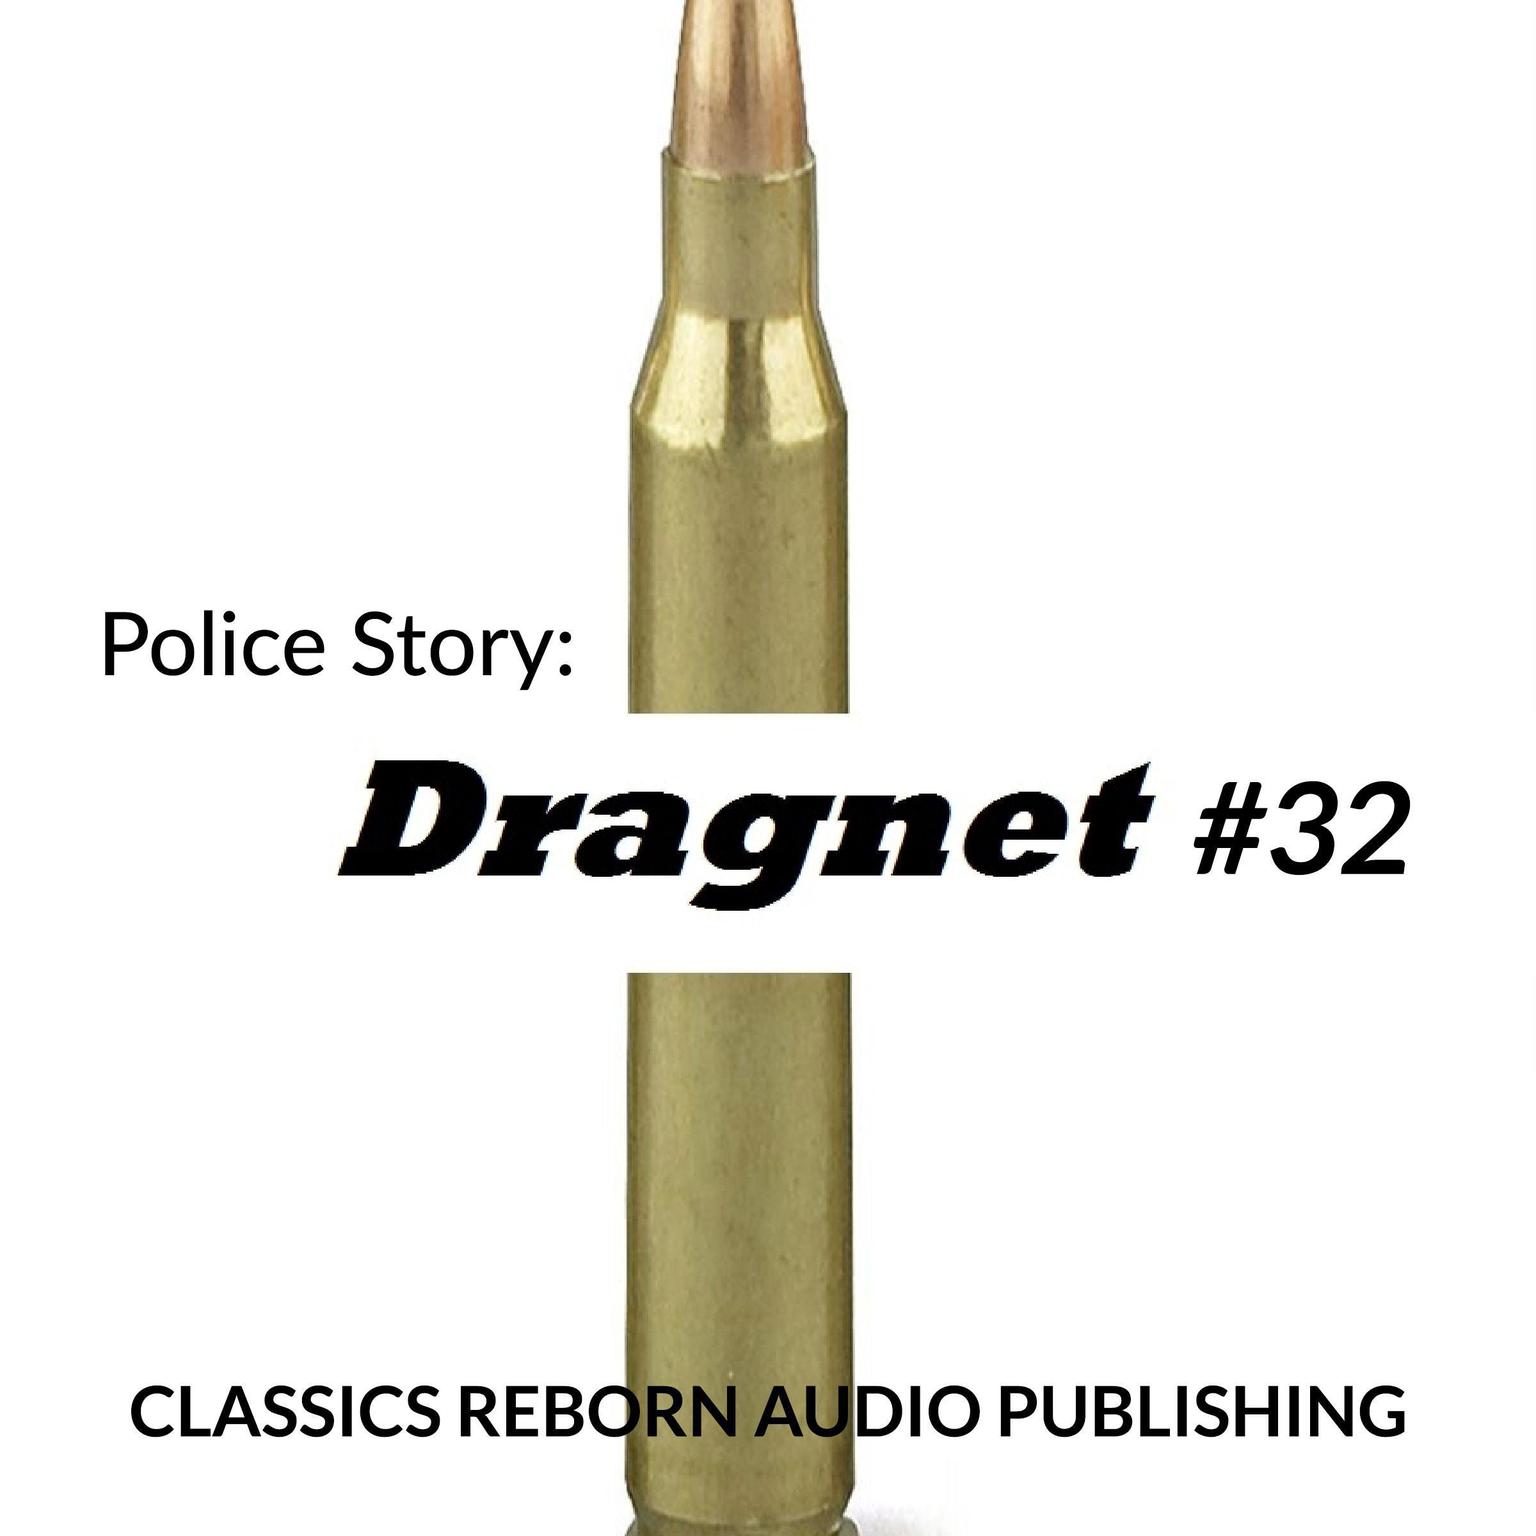 Police Story: Dragnet #32 Audiobook, by Classics Reborn Audio Publishing